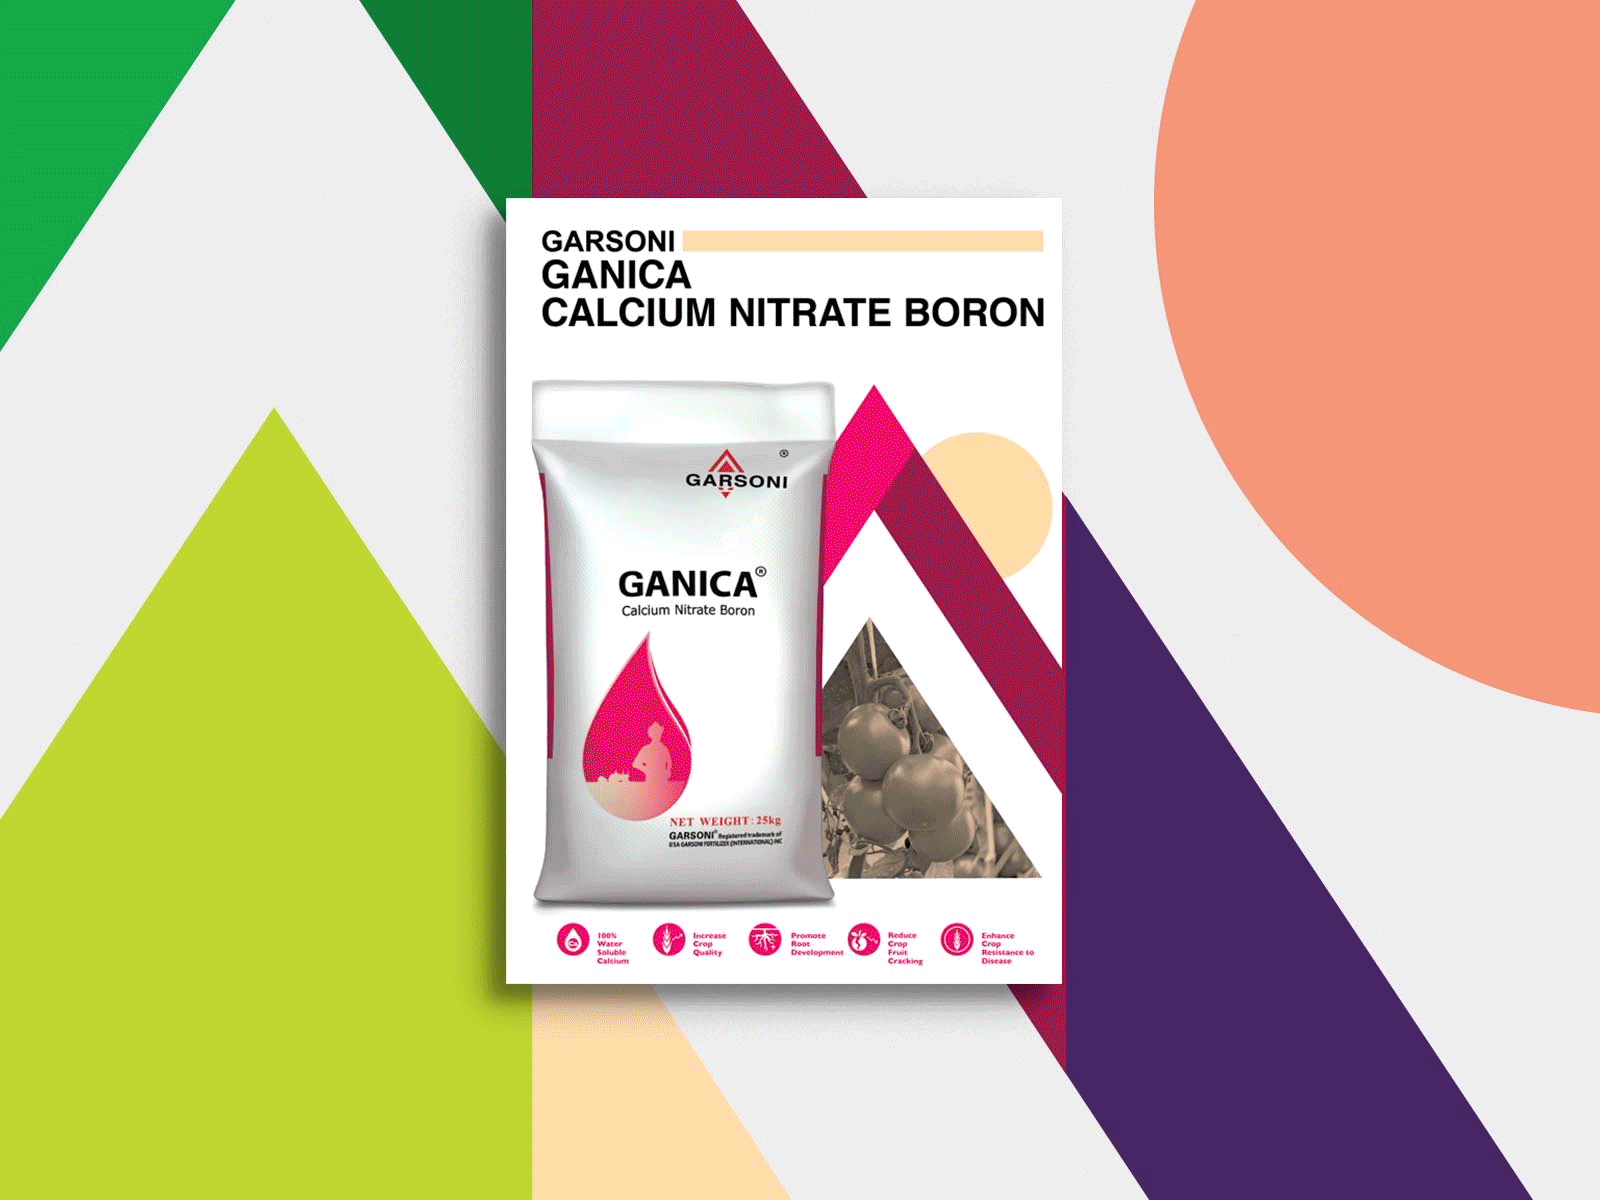 Garsoni flyer design with new art direction for the brand featuring bold graphics and product packaging and crafted icons 